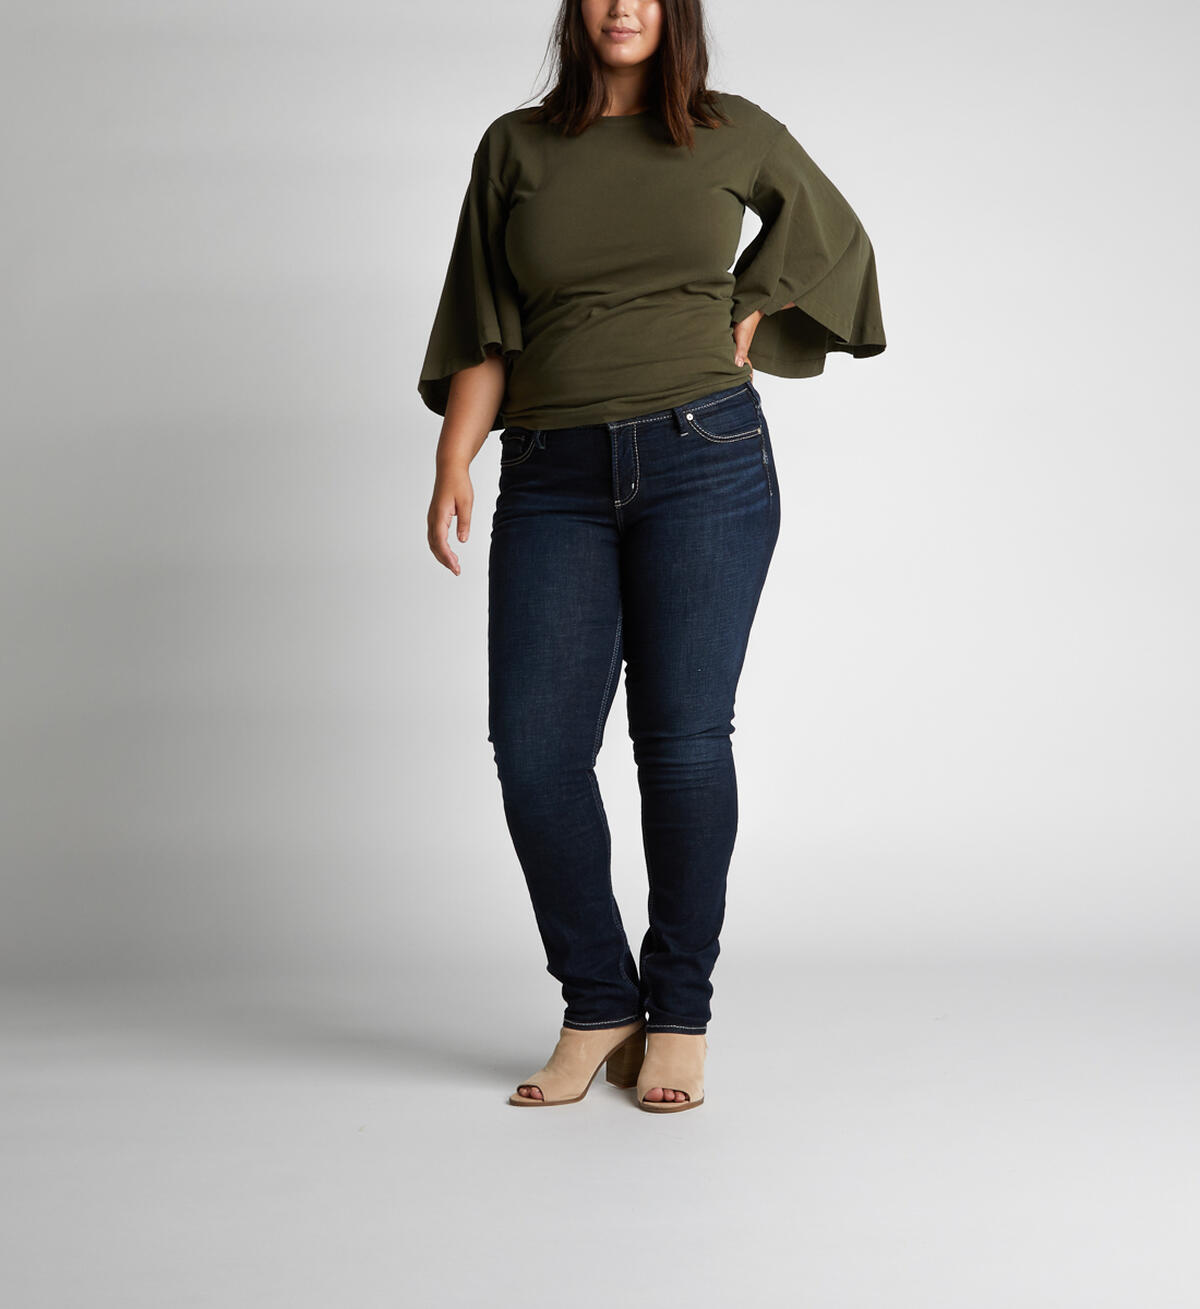 Elyse Mid-Rise Curvy Relaxed Straight-Leg Jeans, , hi-res image number 3